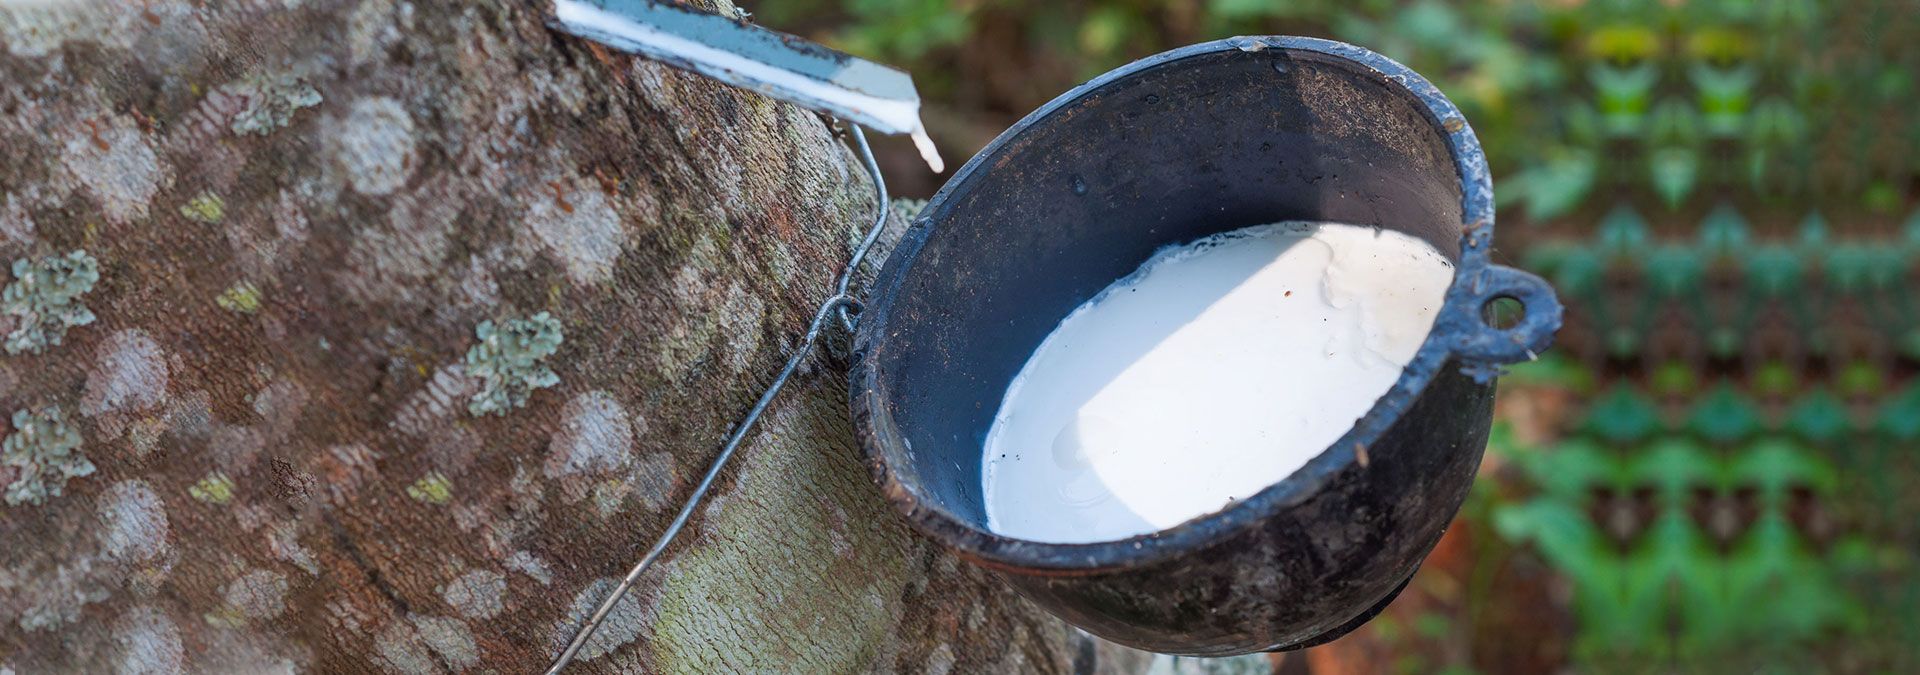 Where Does Natural Rubber Come From?